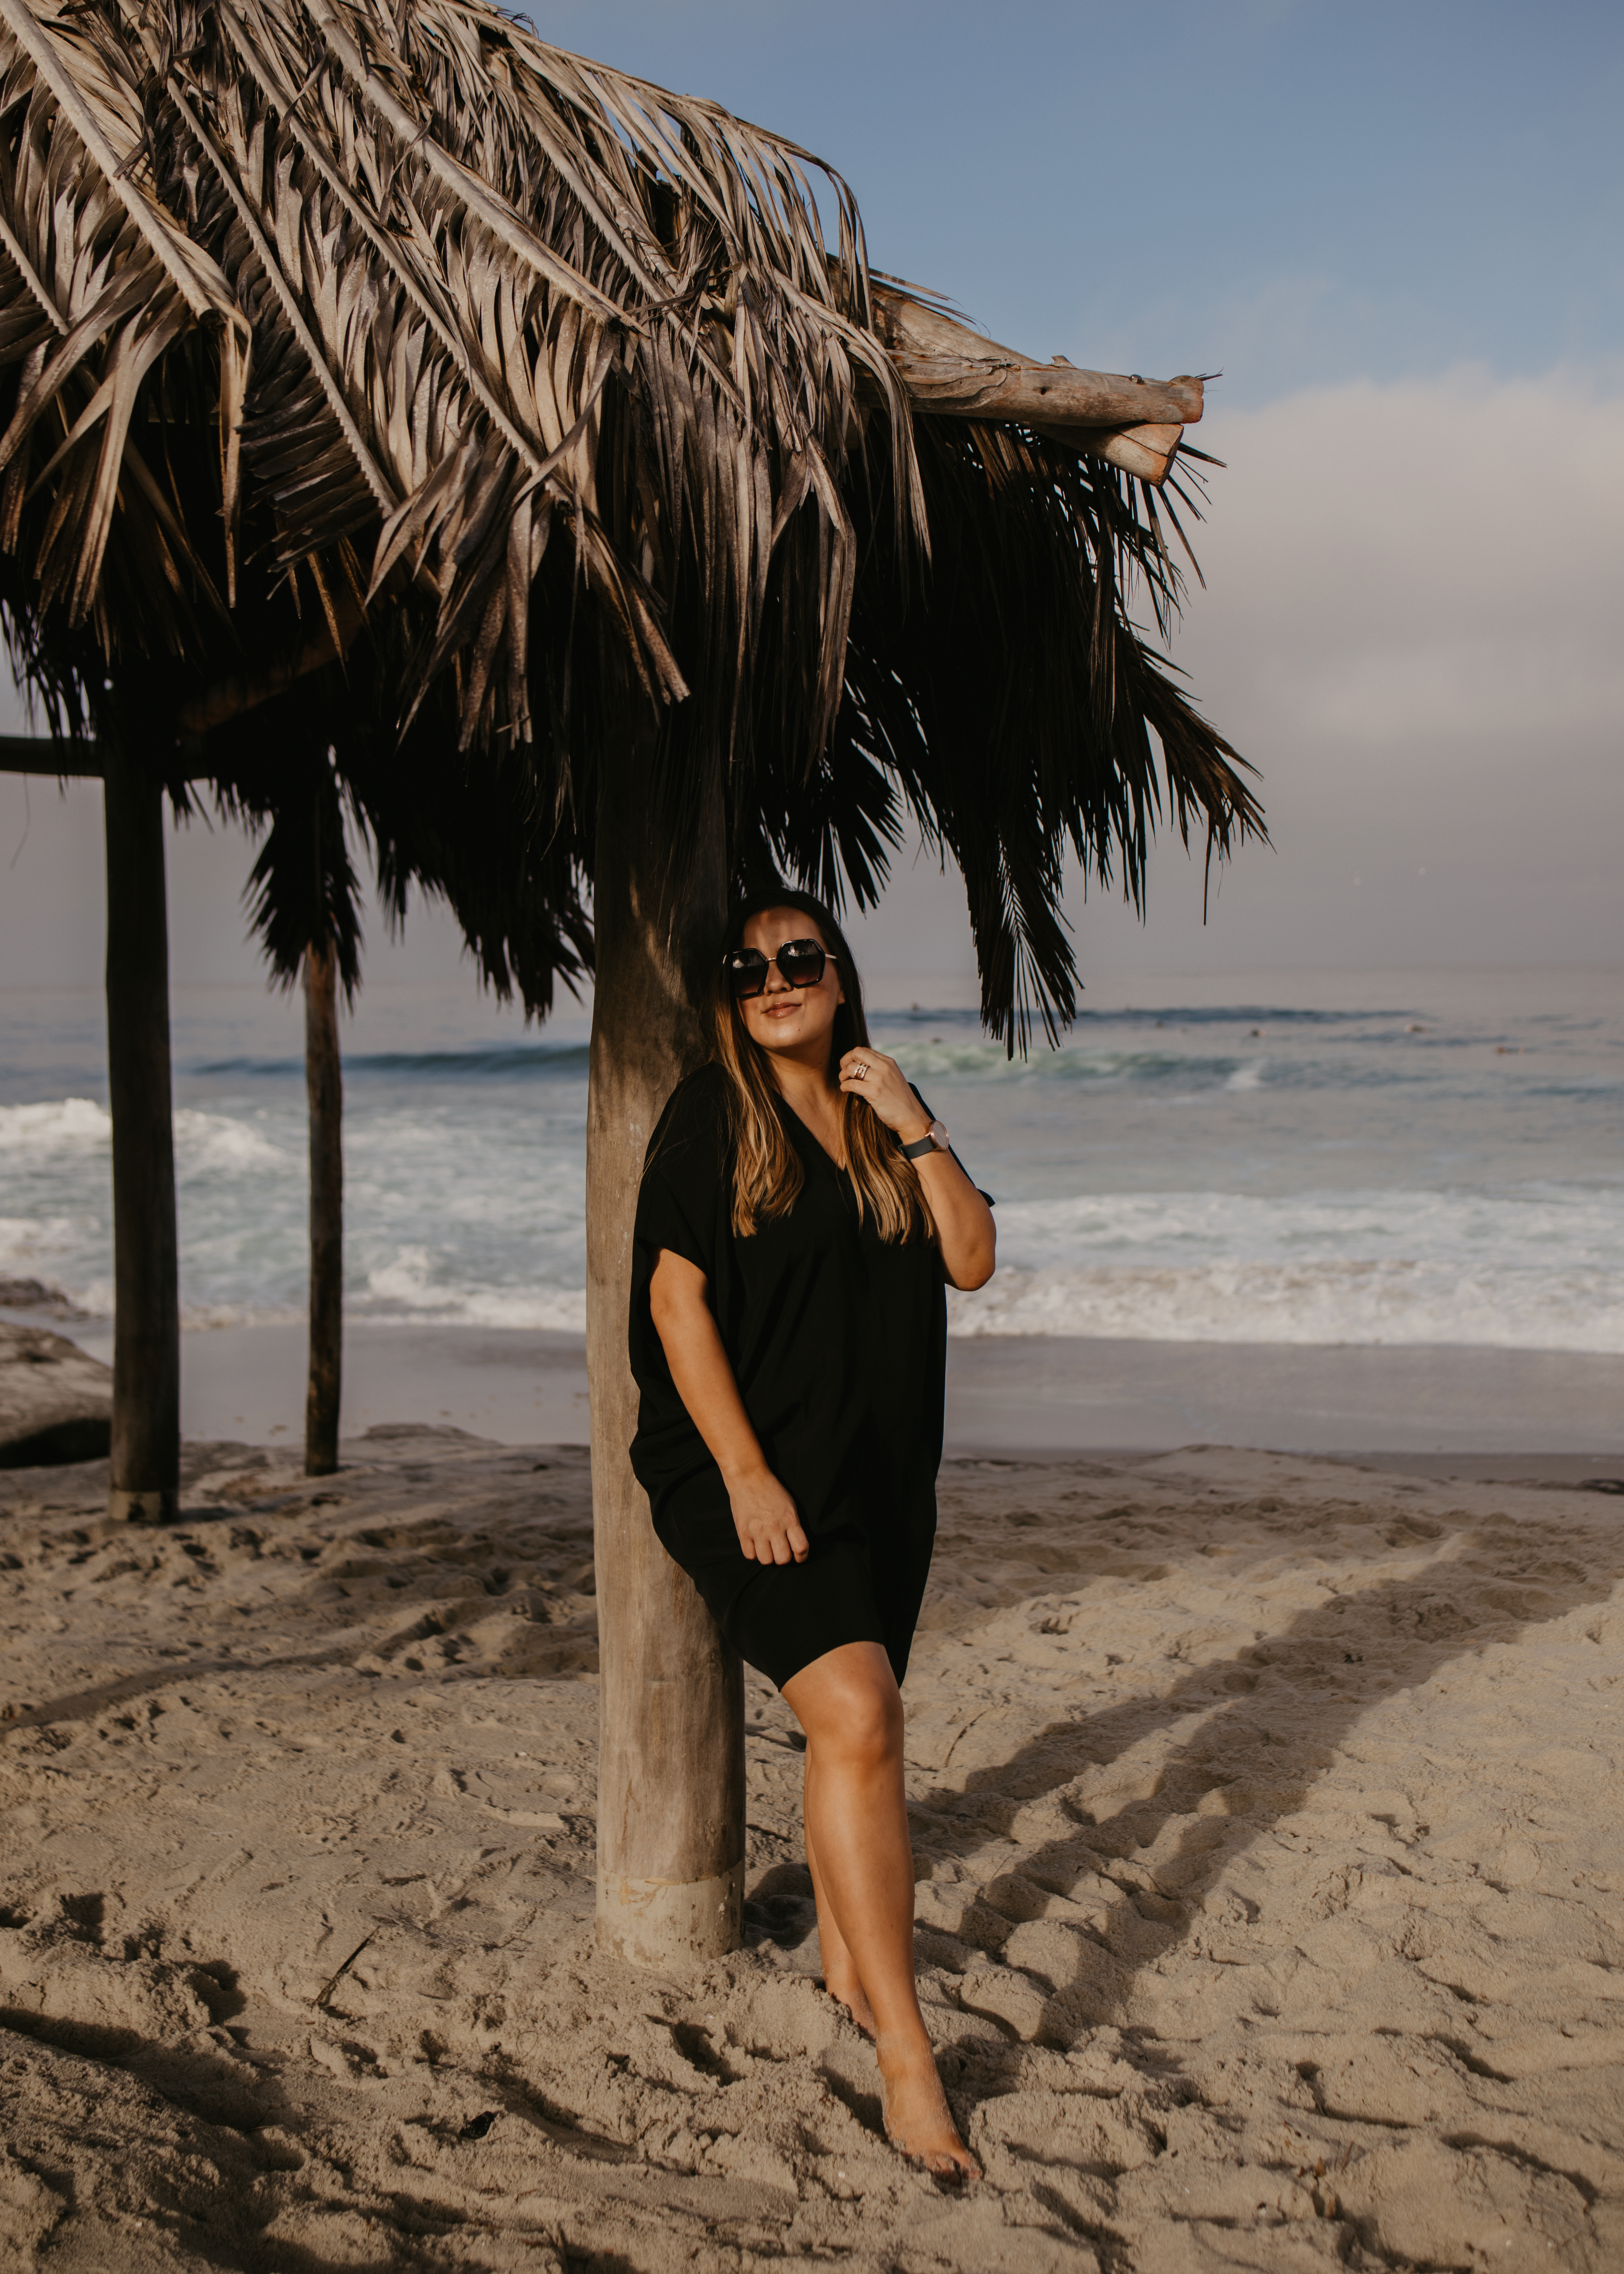 San Francisco blogger, Ashley Zeal, from Two Peas in a Prada breaks down all her maternity staples. She is sharing all of her favorite maternity items so you can build a capsule wardrobe for pregnancy. 